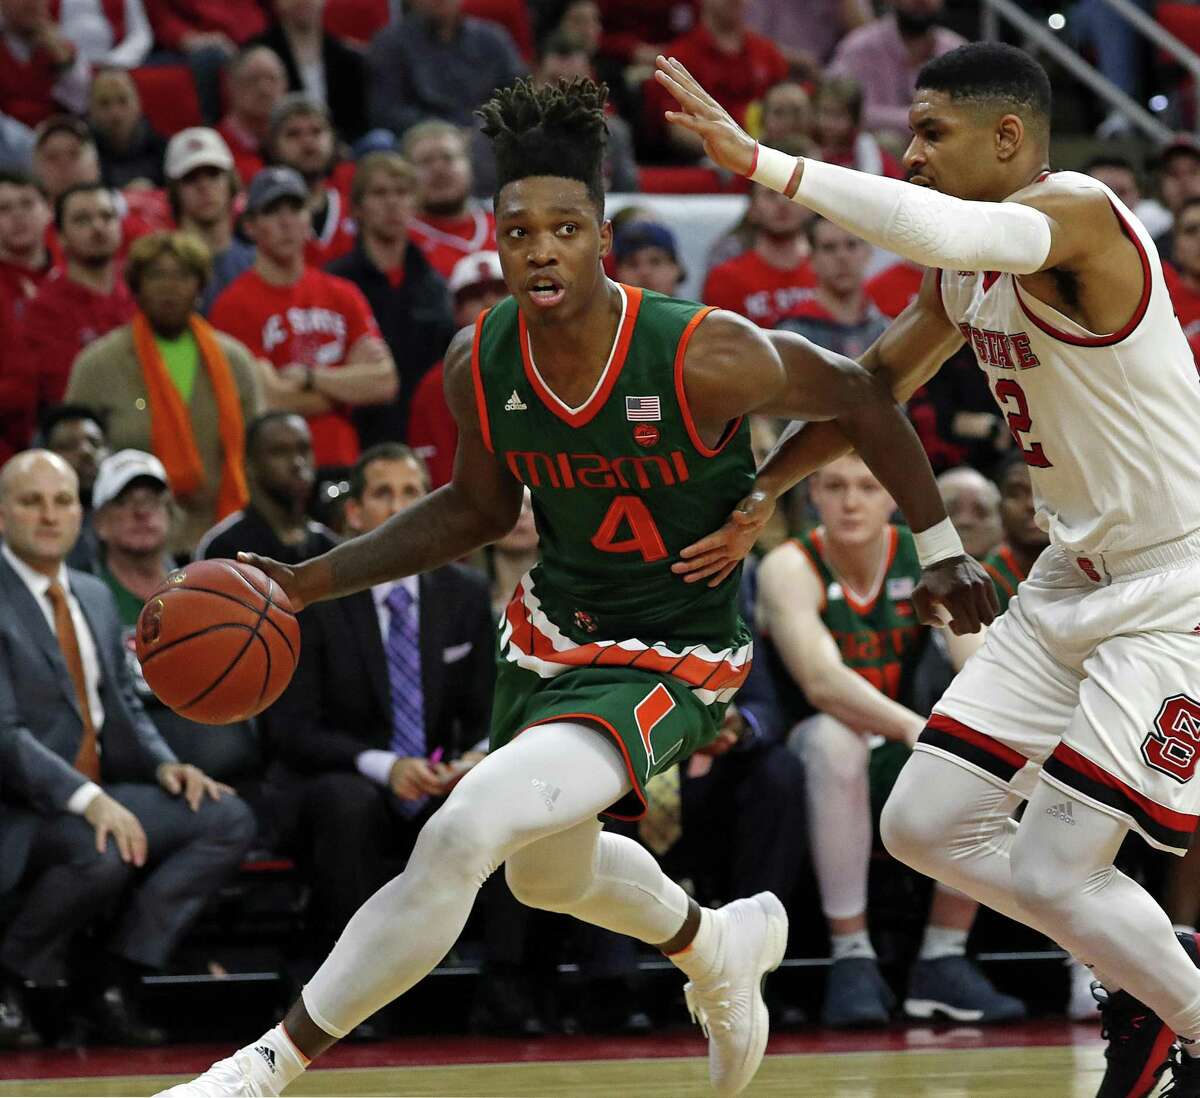 FILE - In this Jan. 21, 2018, file photo, Miami's Lonnie Walker IV (4) drives the ball around North Carolina State's Allerik Freeman (12) during the second half of an NCAA college basketball game in Raleigh, N.C. Walker is a possible pick in Thursday's NBA Draft. (AP Photo/Karl B DeBlaker, File)